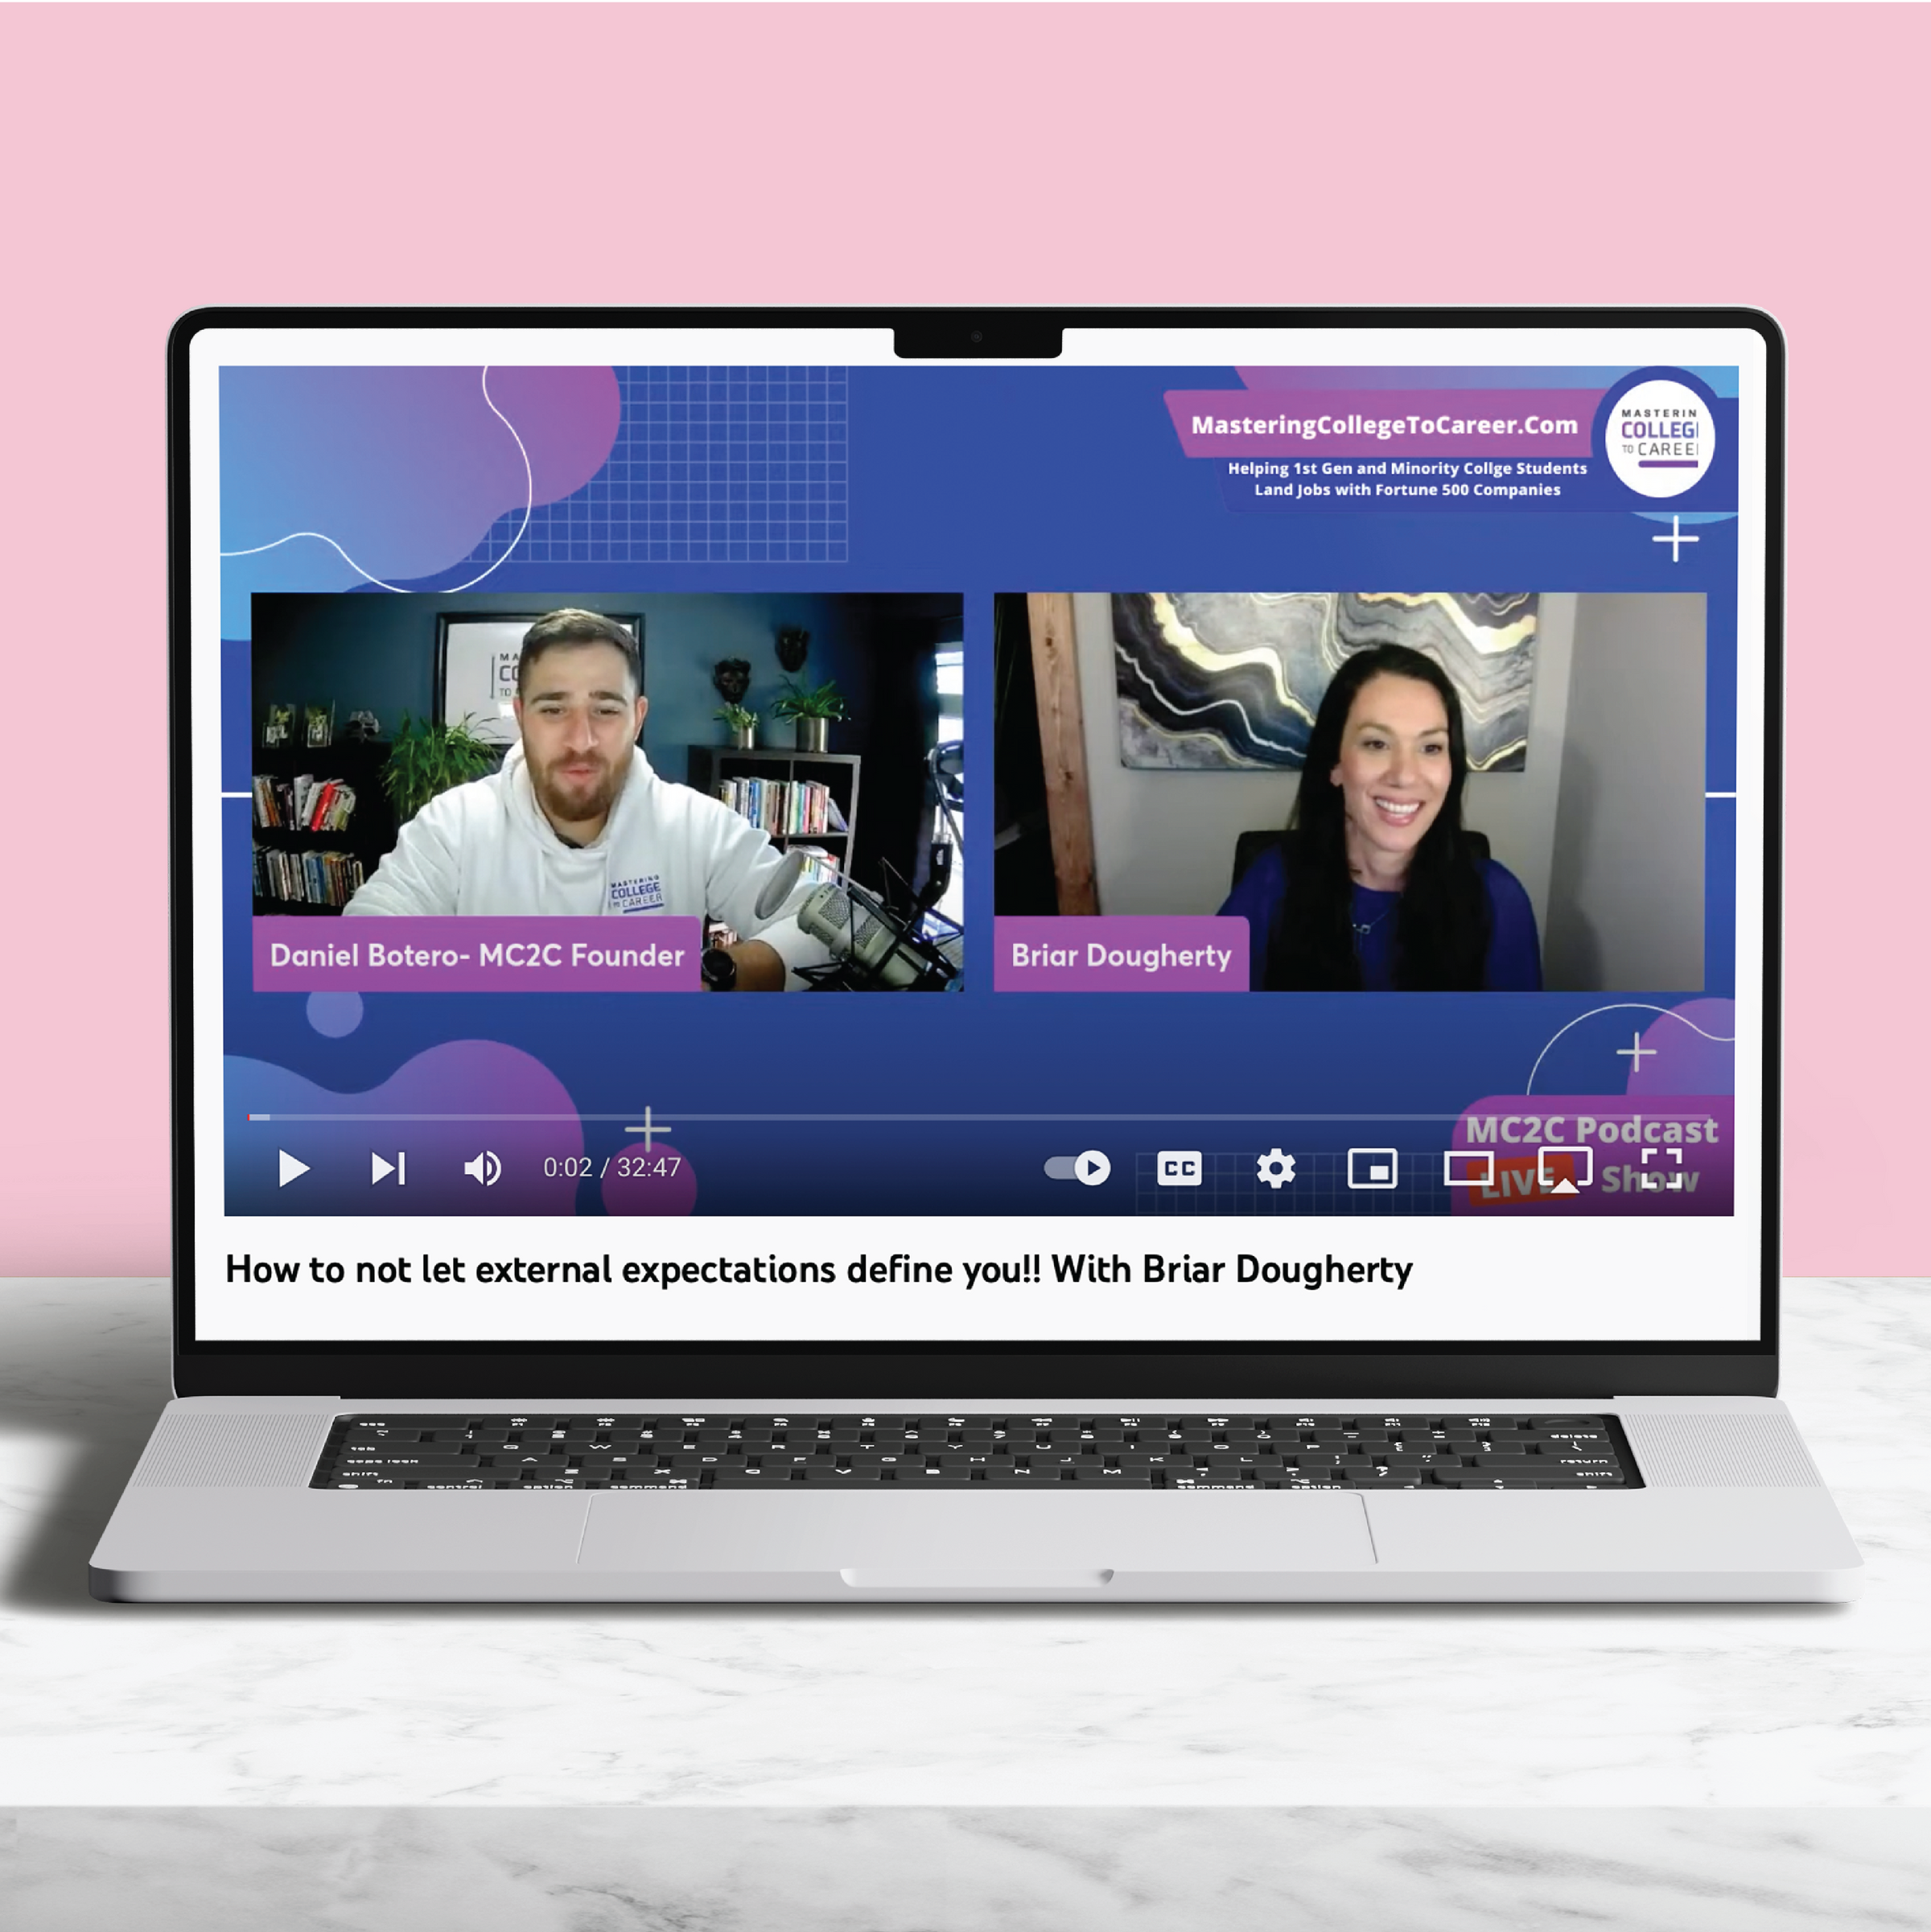 laptop displaying a virtual webinar with a man and a women on a pink background with marble table